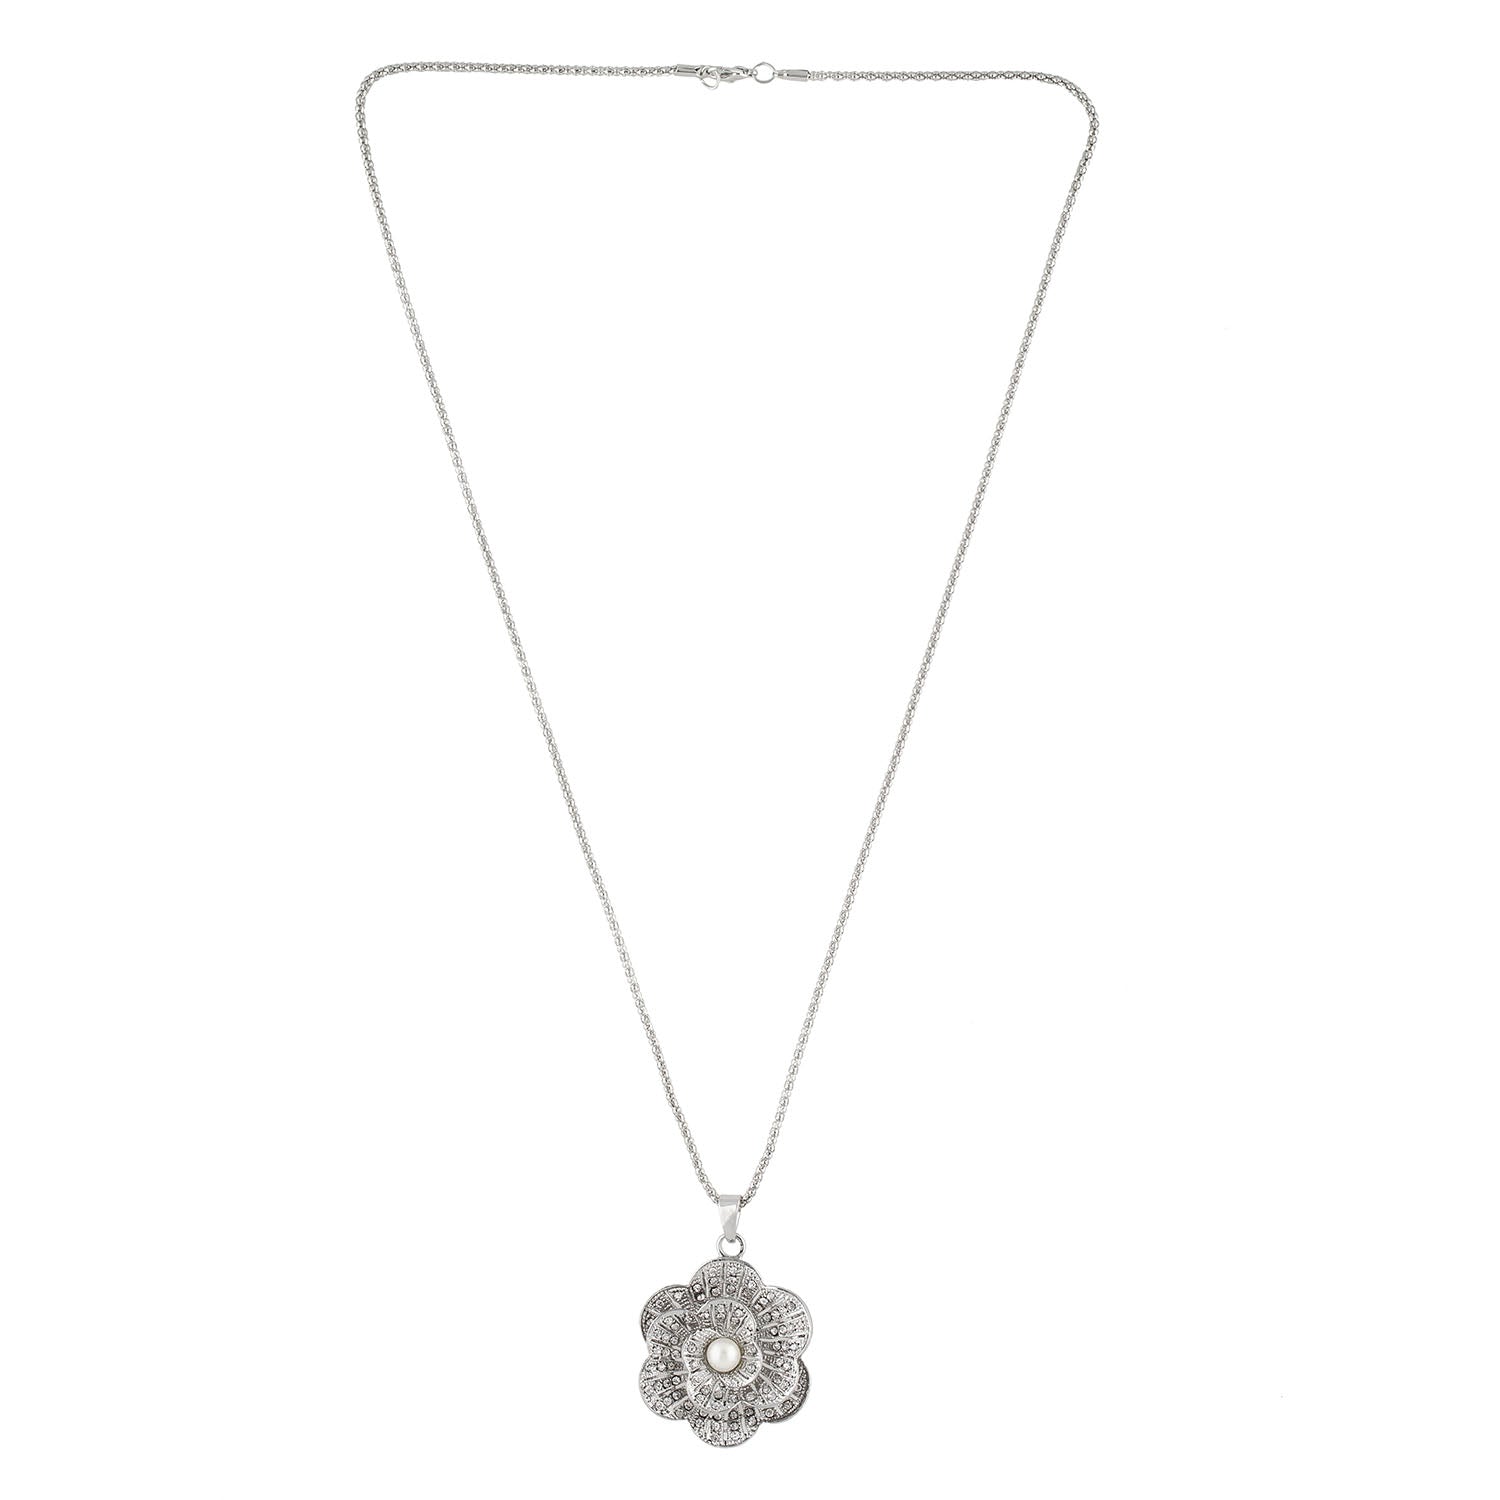 Grey Colour Floral Shape Alloy Pendant with Chain for Girls and Women